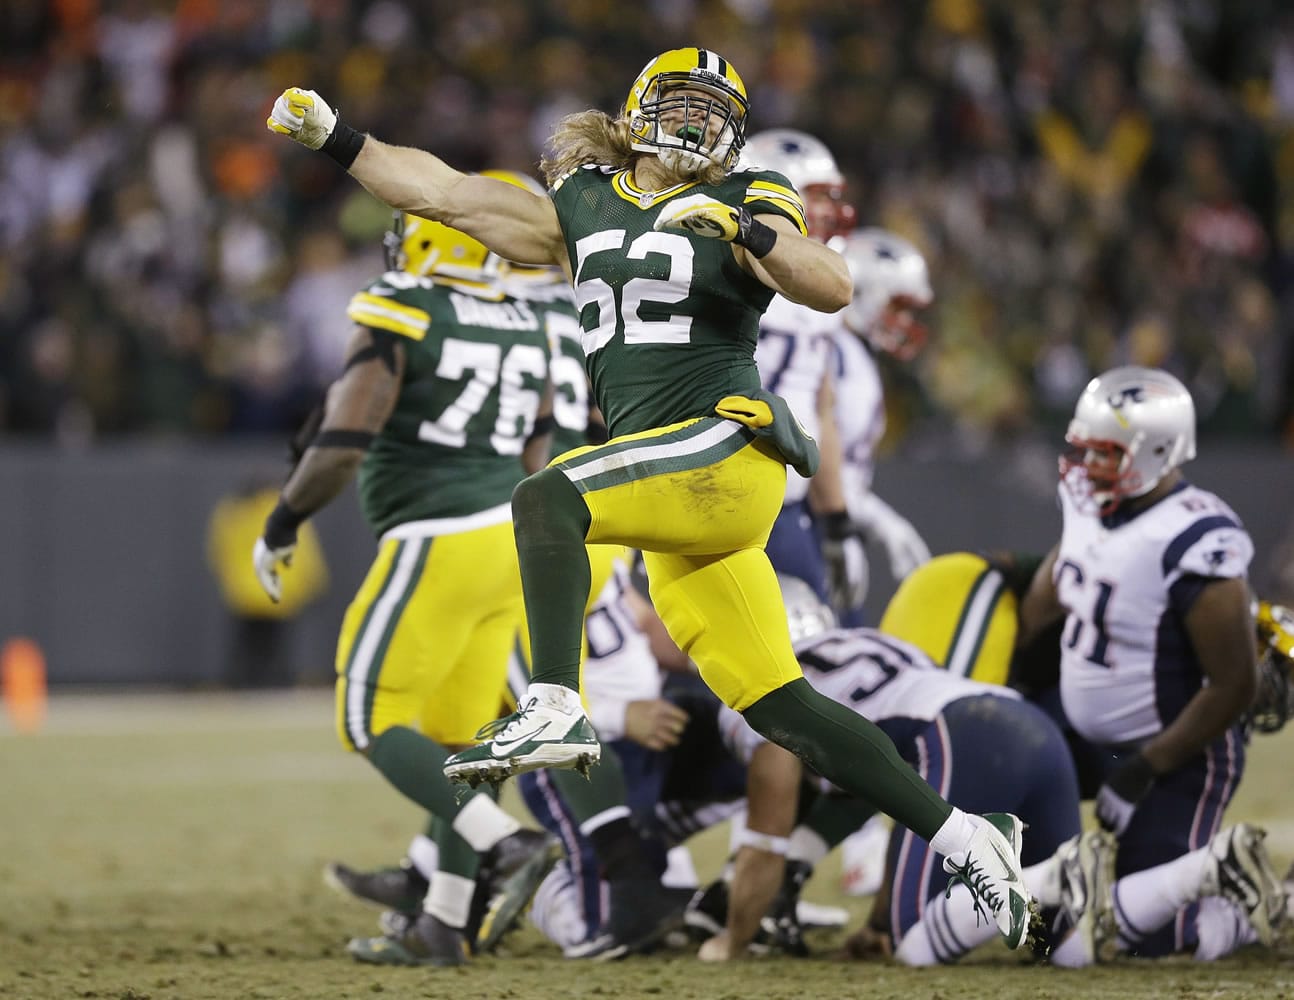 Green Bay Packers' Clay Matthews celebrates after the New England Patriots missed a field goal attempt during the fourth quarter Sunday, Nov. 30, 2014, in Green Bay, Wis.